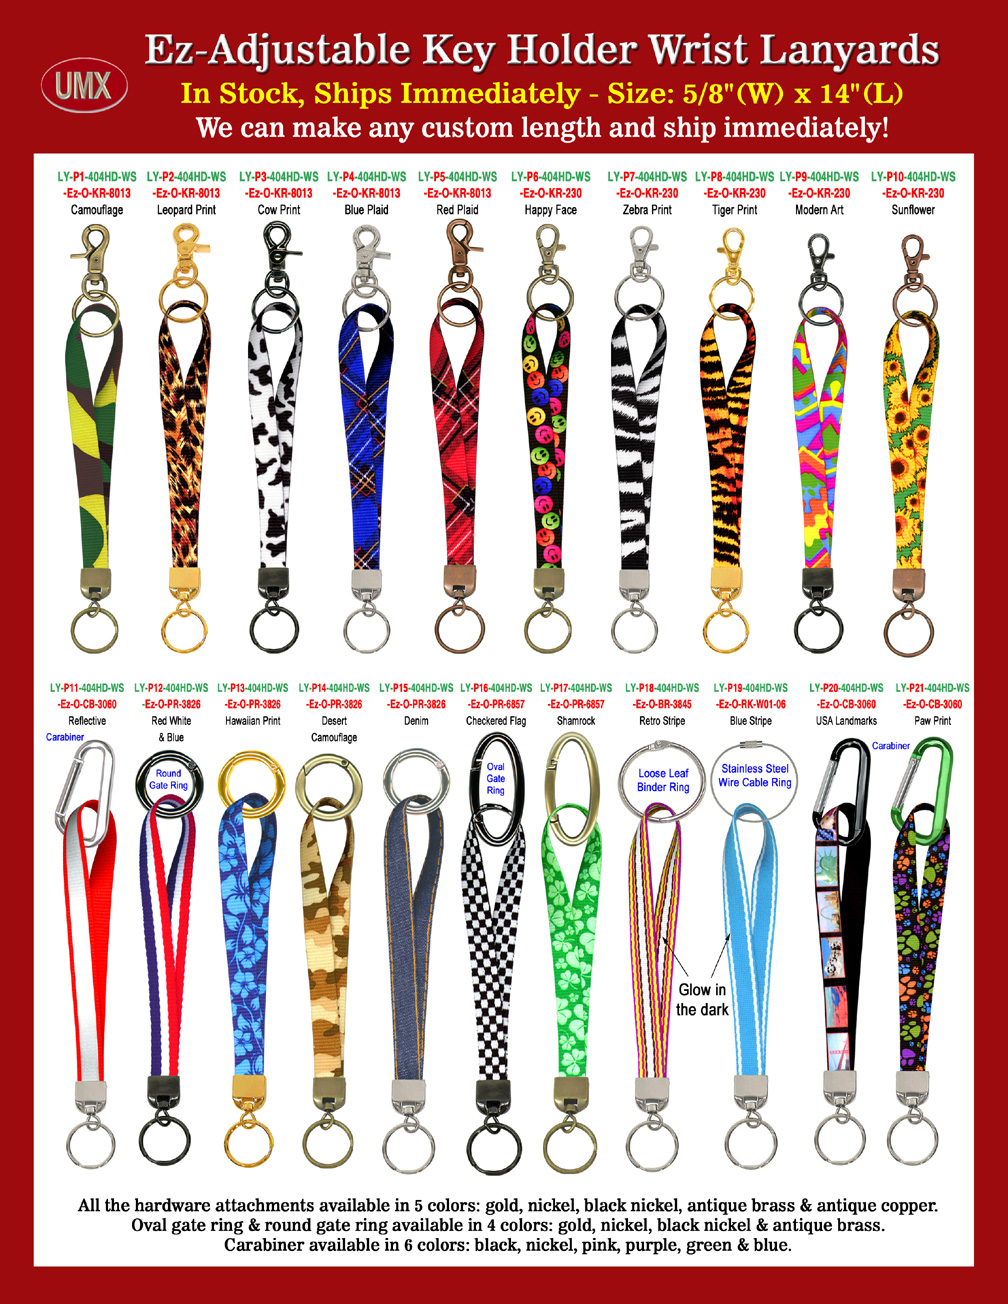 Key Holder Lanyards With Forest Camouflage, Leopard, Cow Print, Blue and Red Plaid, Happy Face, Zebra Print, Tiger Print and Modern Art Themes.